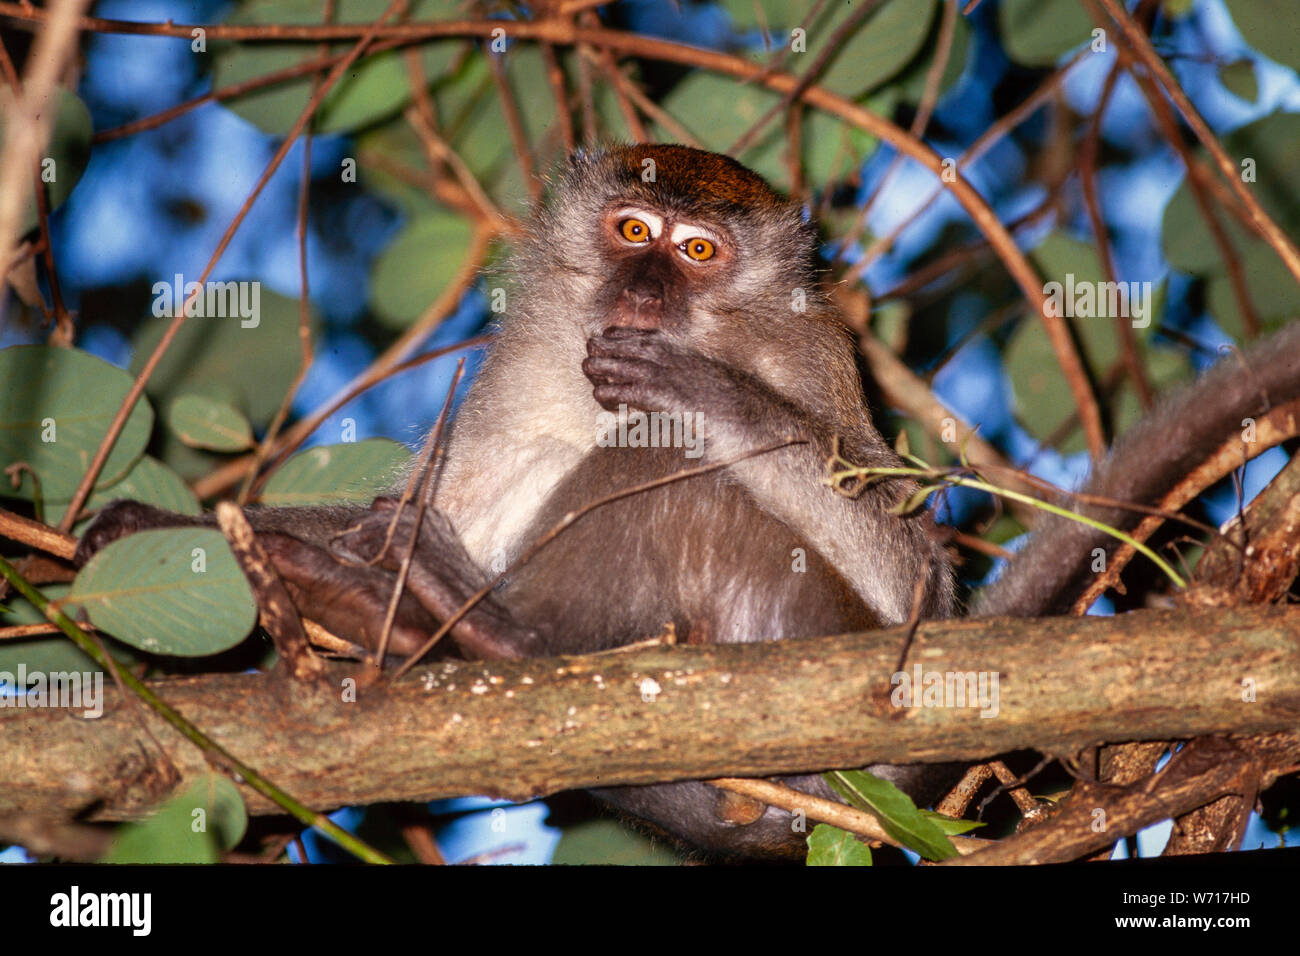 Macaque monkey, Macaca sp. An 'Old world' monkey species, Malaysia Stock Photo